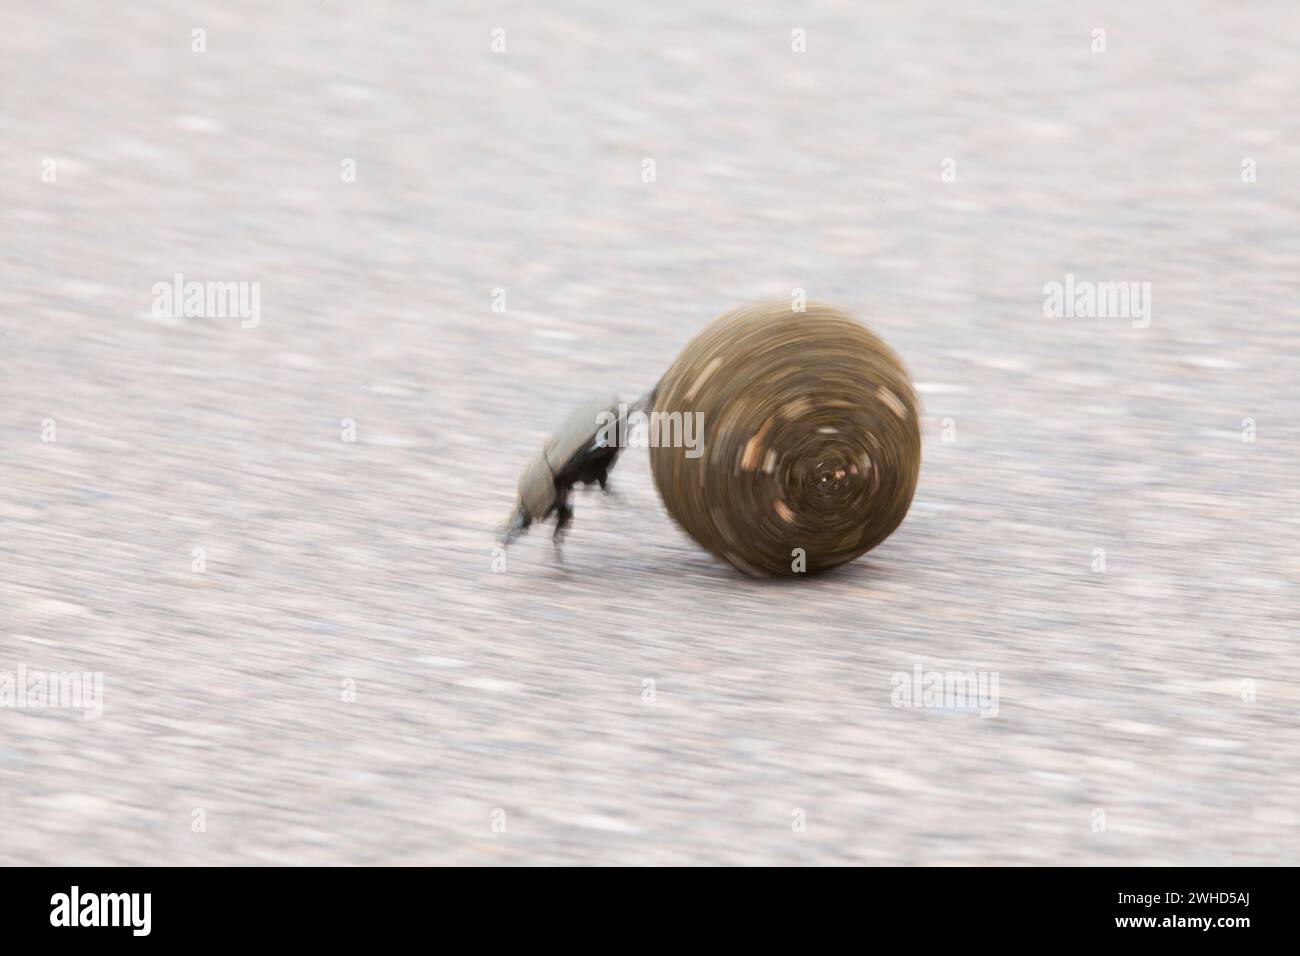 Africa, Dung Beetle, Invertebrate, Kruger National Park, South Africa, Limpopo Province, South Africa, daytime, National Park, nature, no people, safari, tourism, blurred motion, animals in the wild, bush, action, rolling Stock Photo